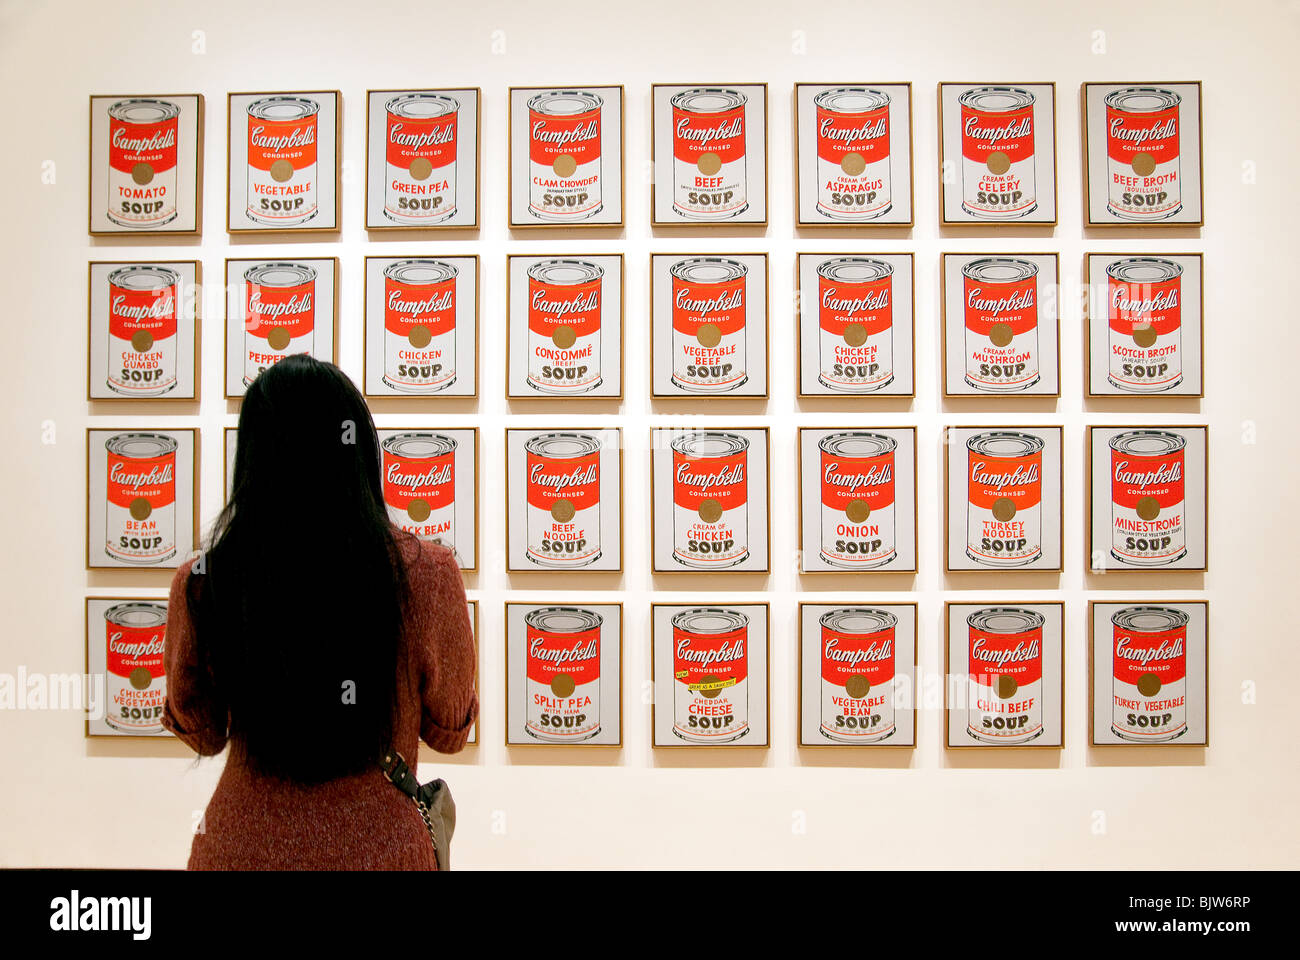 Campbell´s Soup Cans by Andy Warhol, 1962, MOMA, Museum of Modern Art, New York City Stock Photo